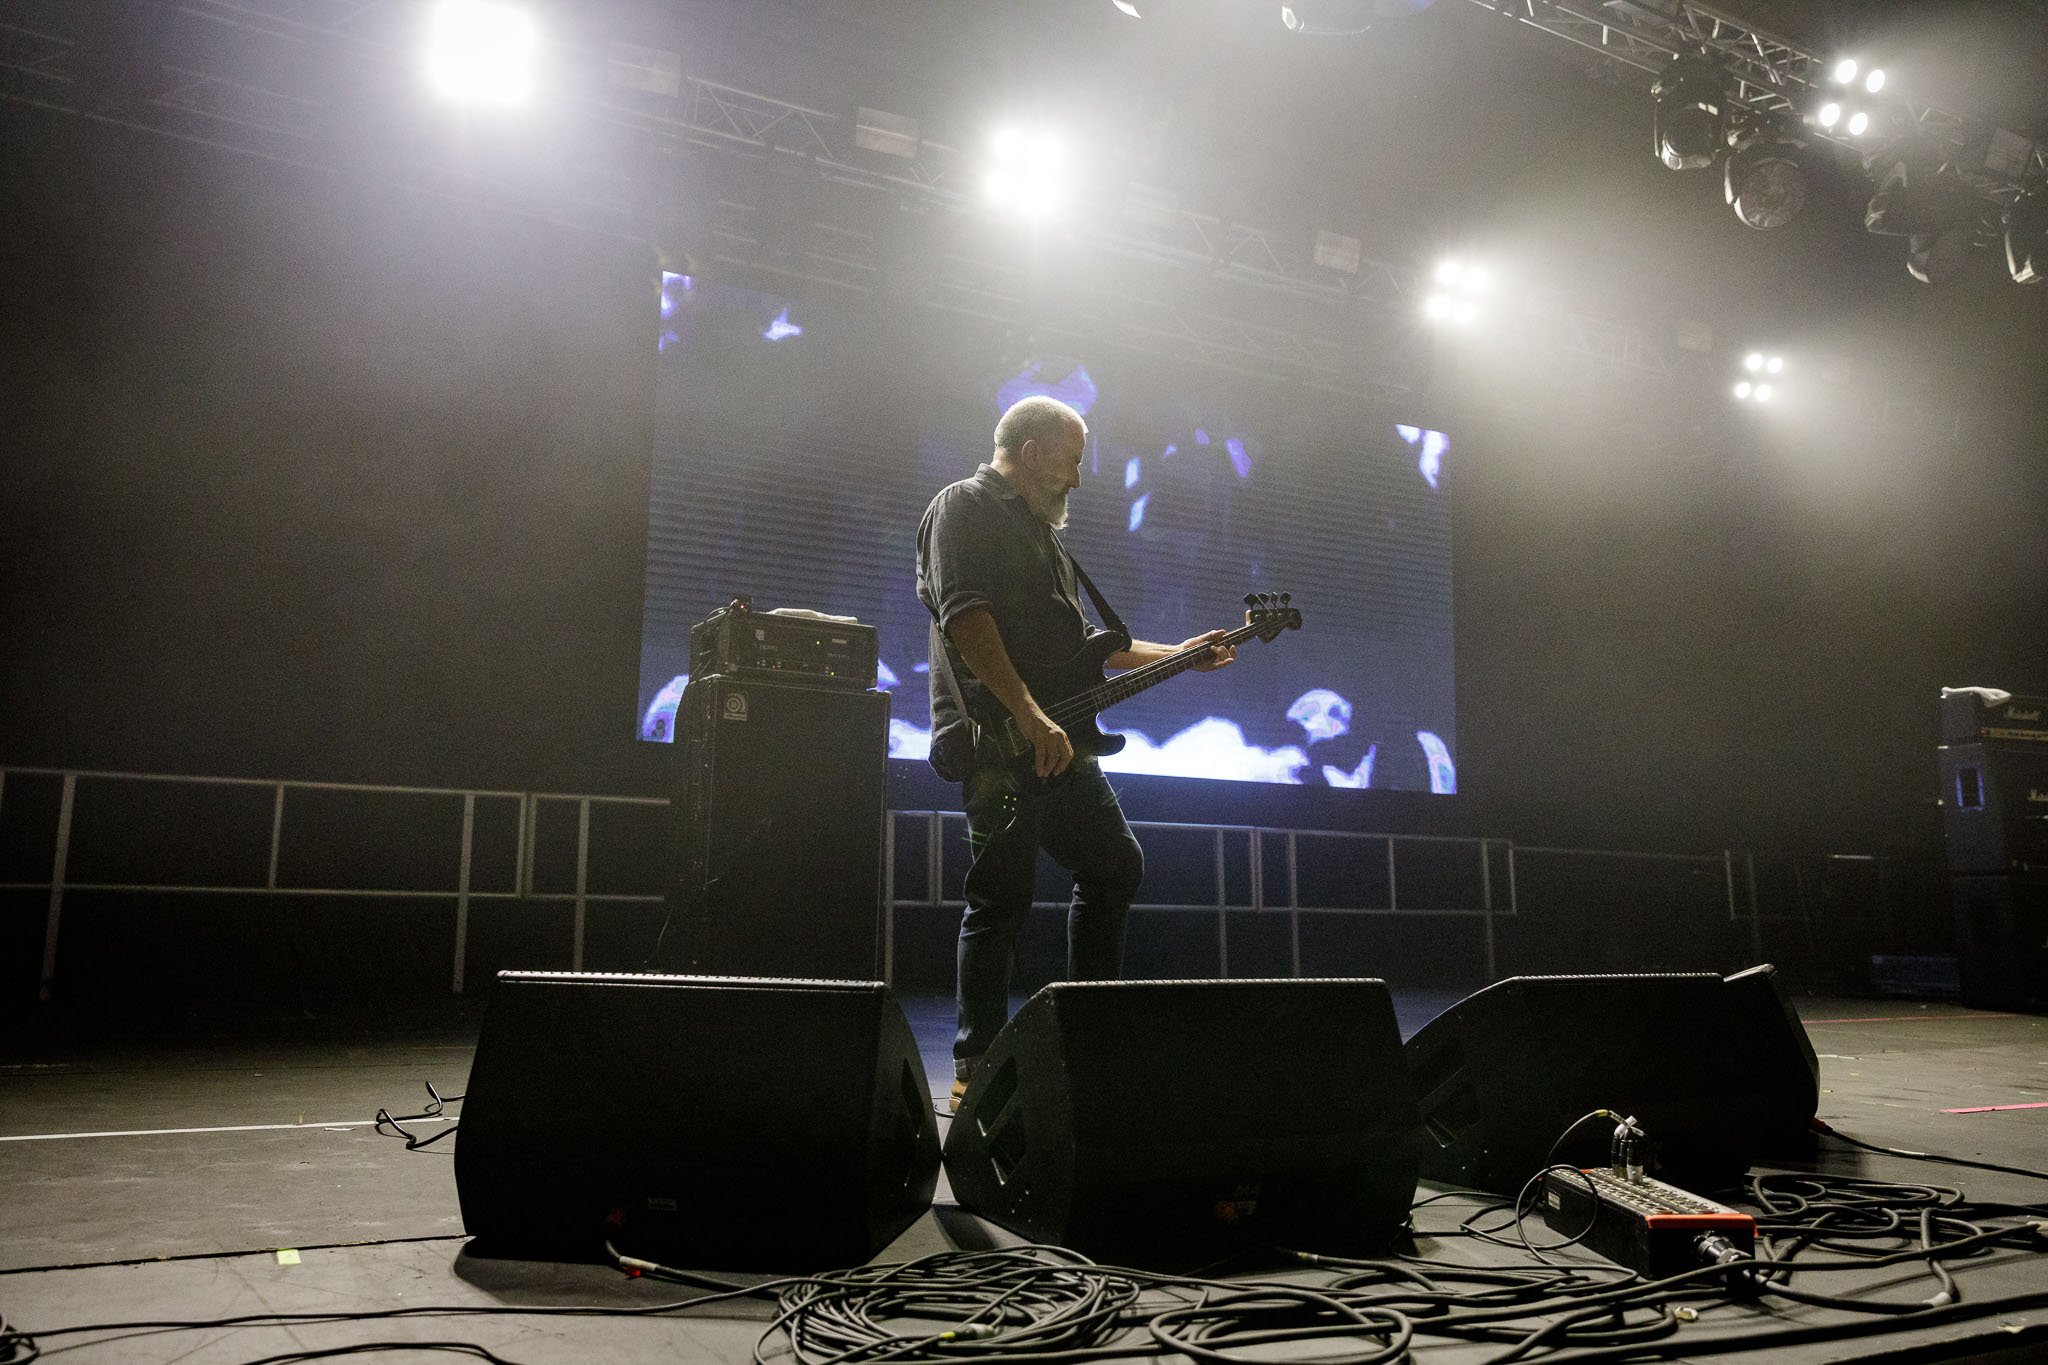 Godflesh at the Damnation Festival in Manchester on  at the Damn